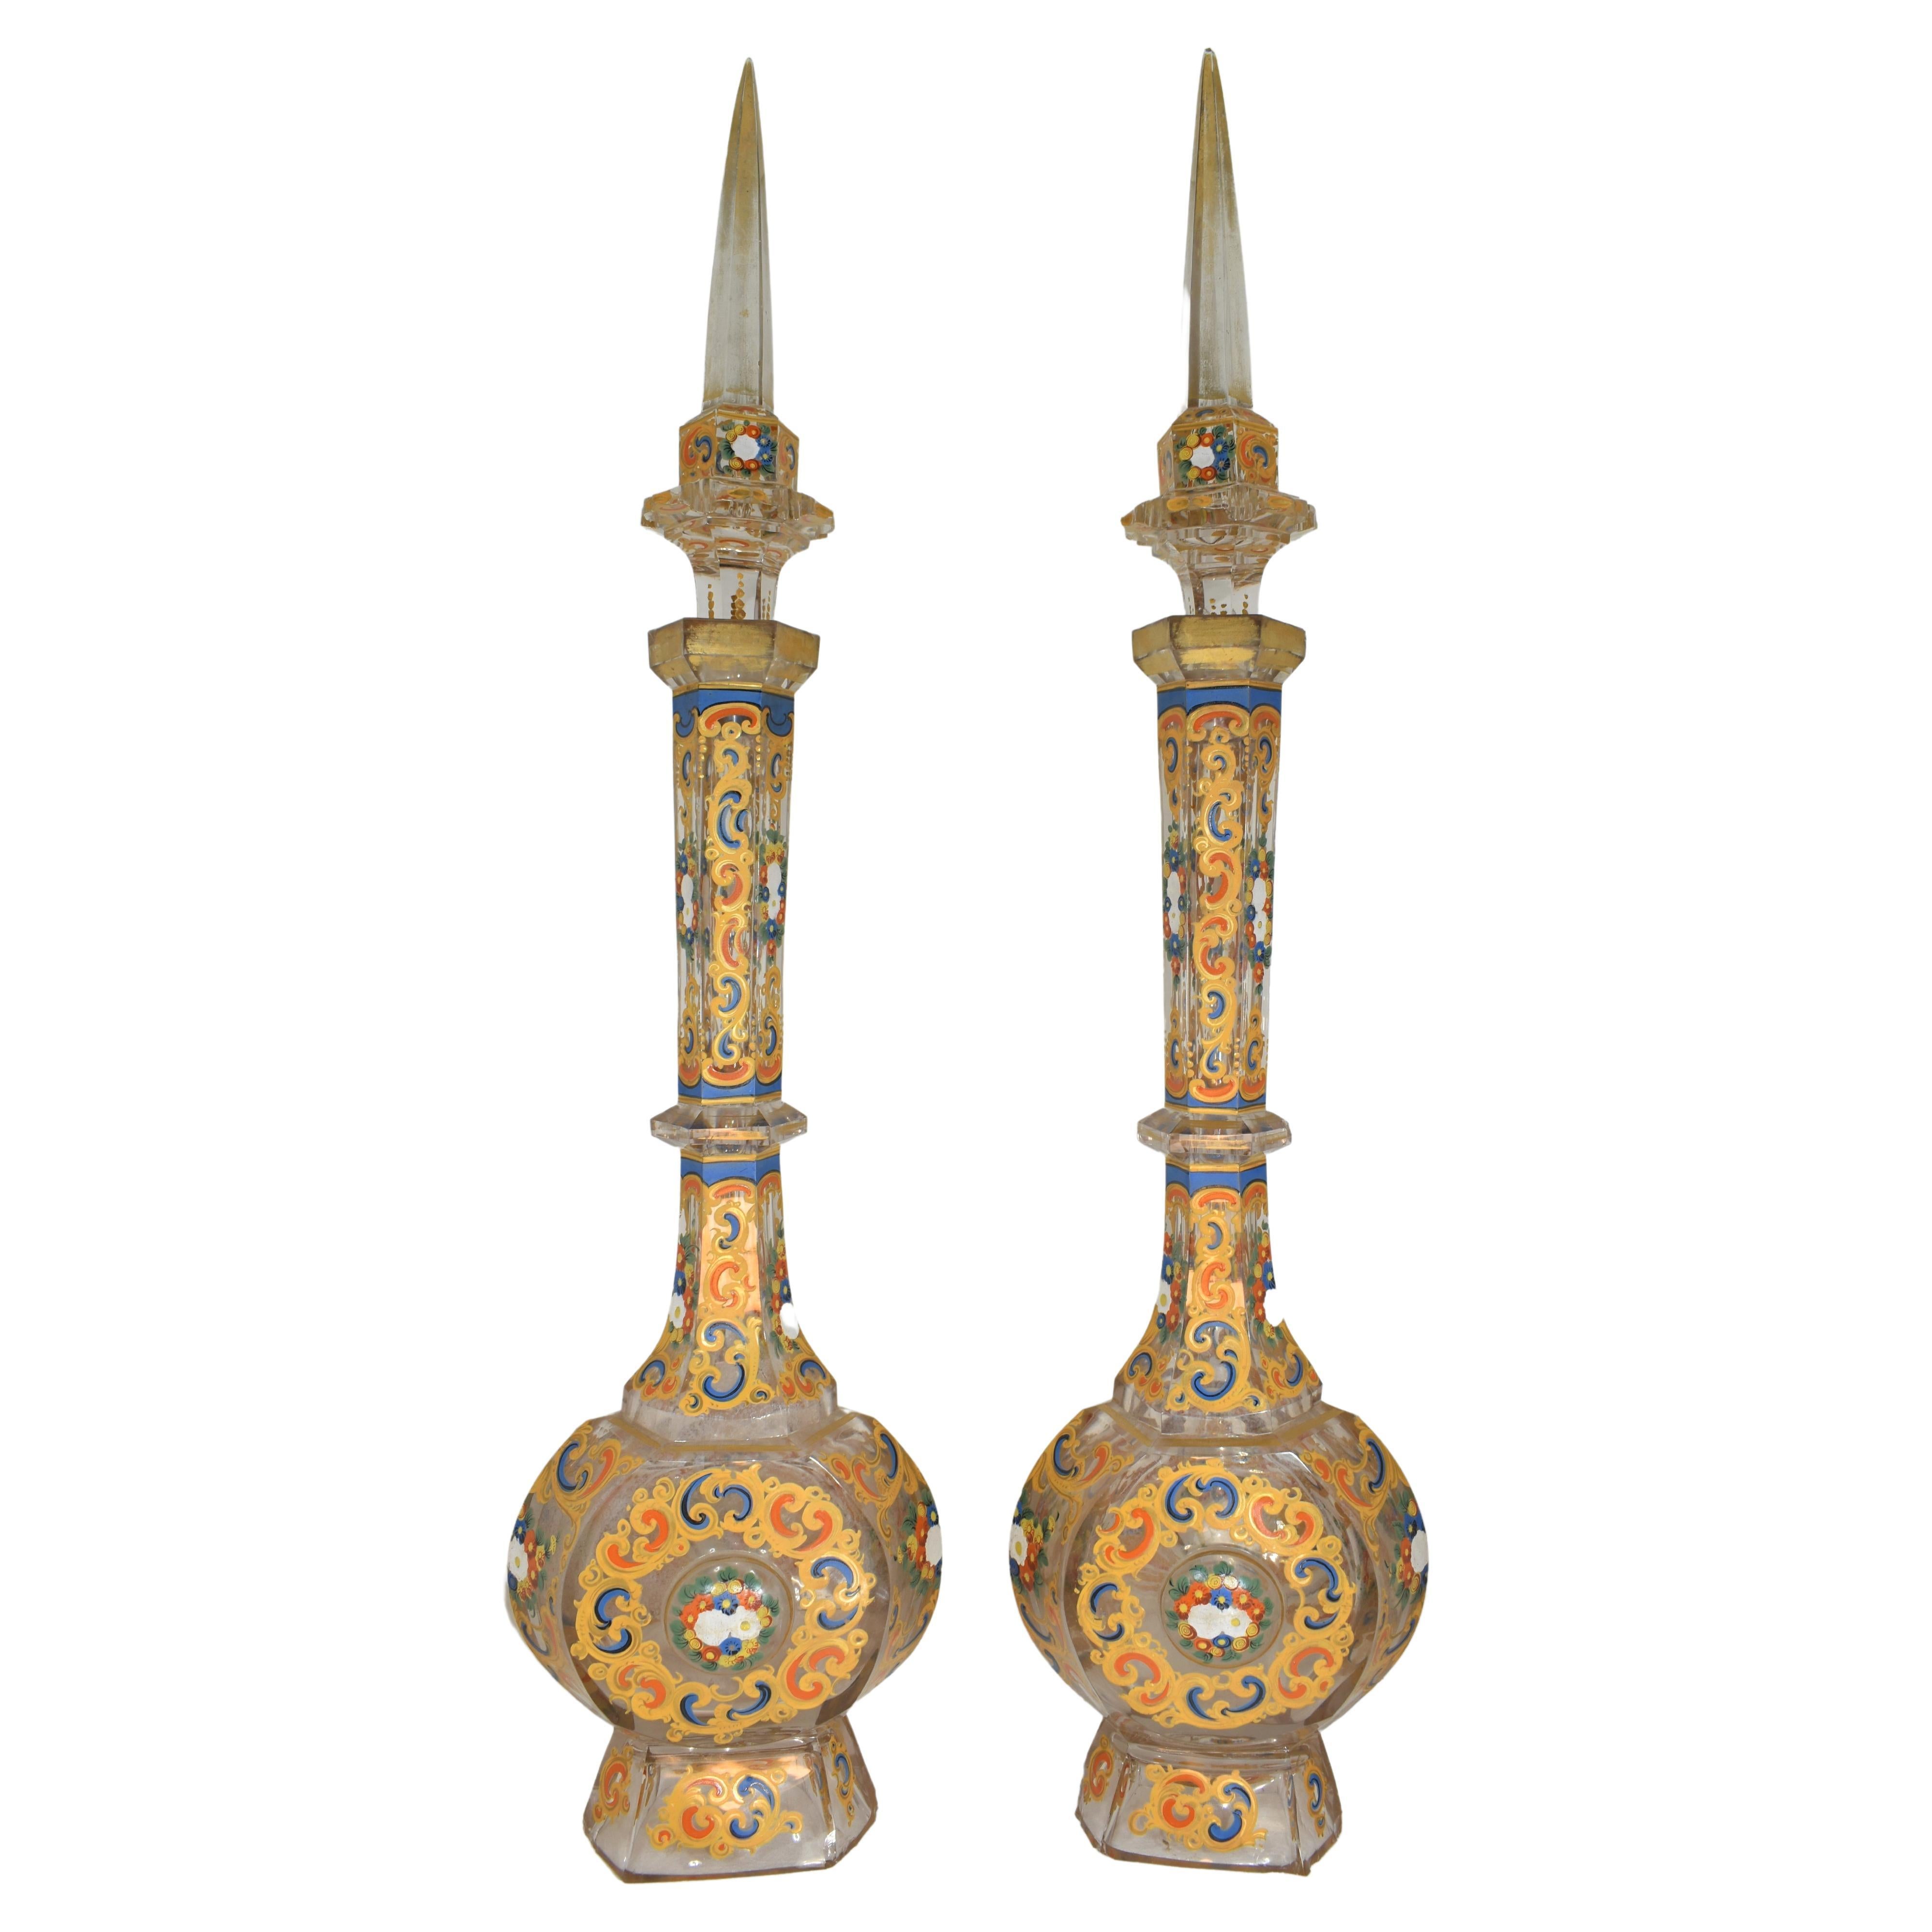 Pair of Enamelled Cut-Glass Decanters, Bohemian for Ottoman Market 19th Century